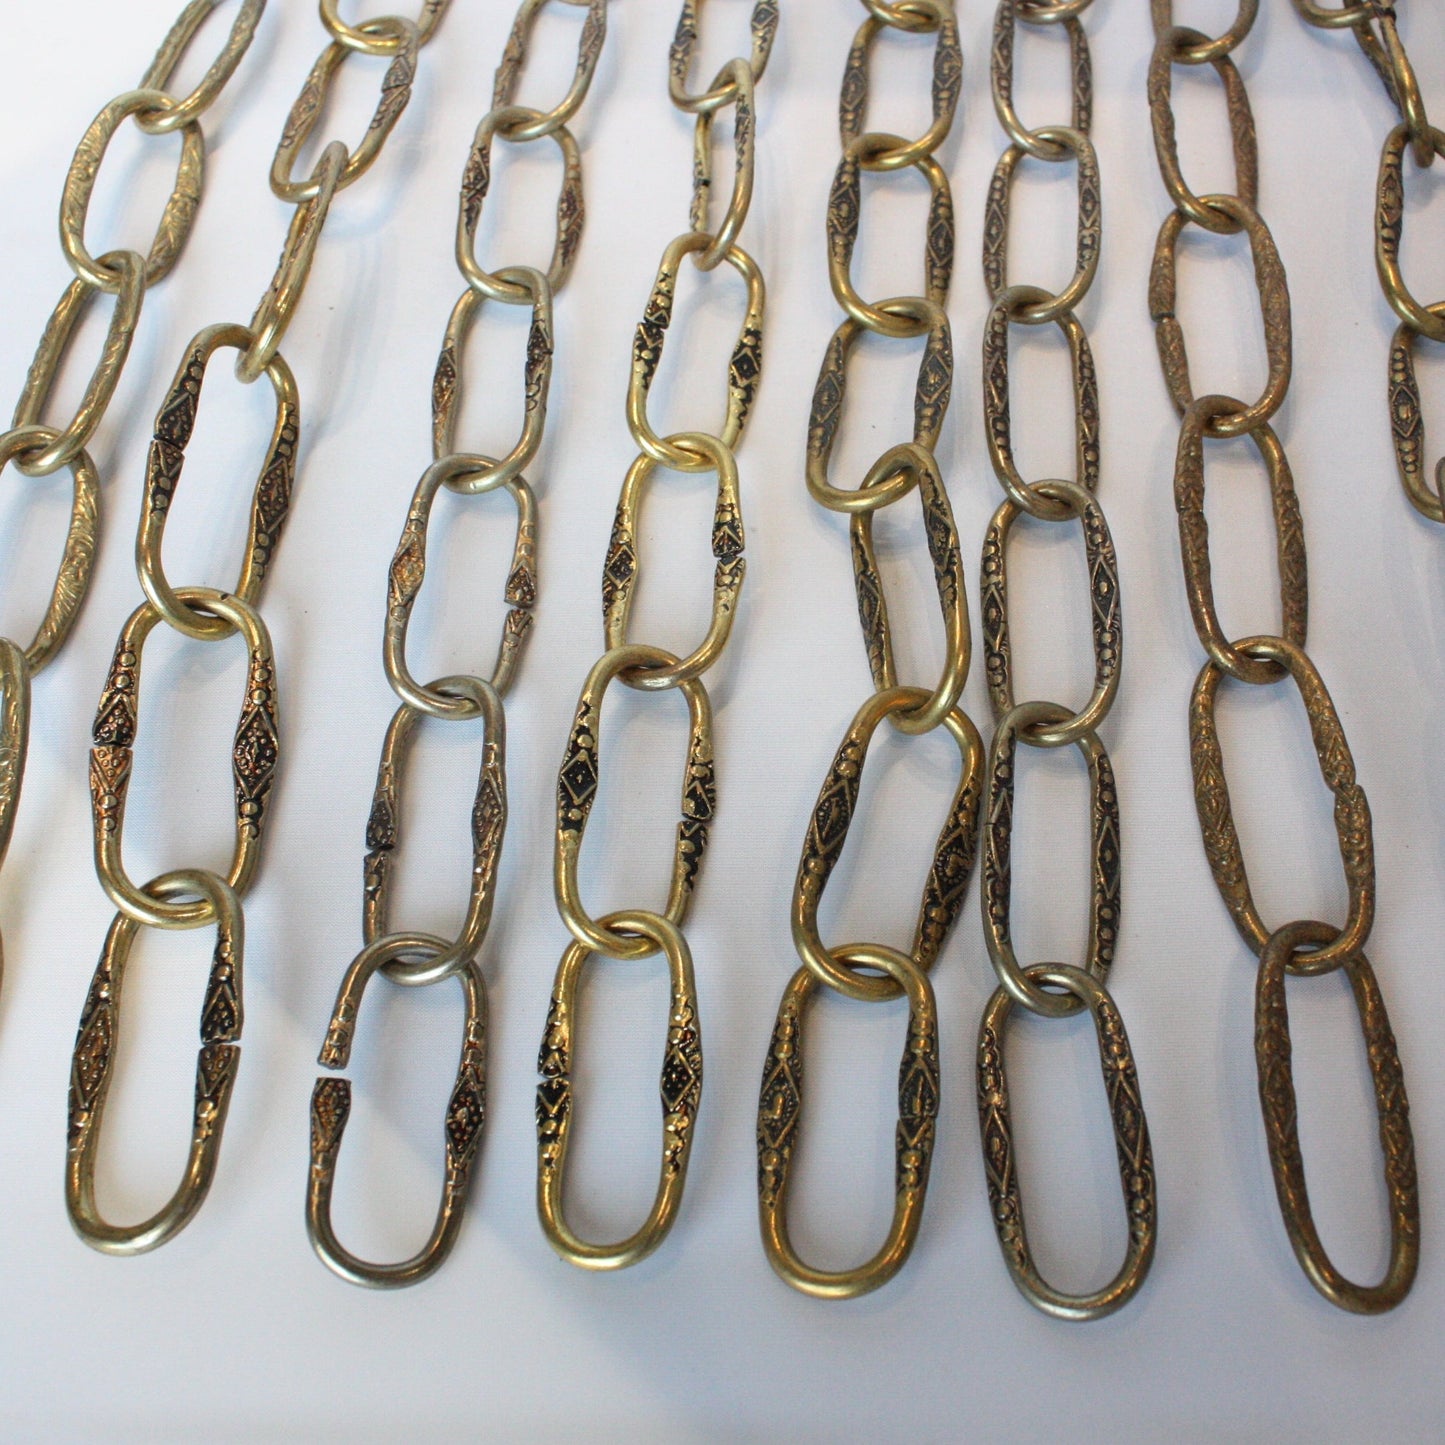 Box of Patterned Brass Plated Spanish Iron Chain, 13" and Under (Box of 16)